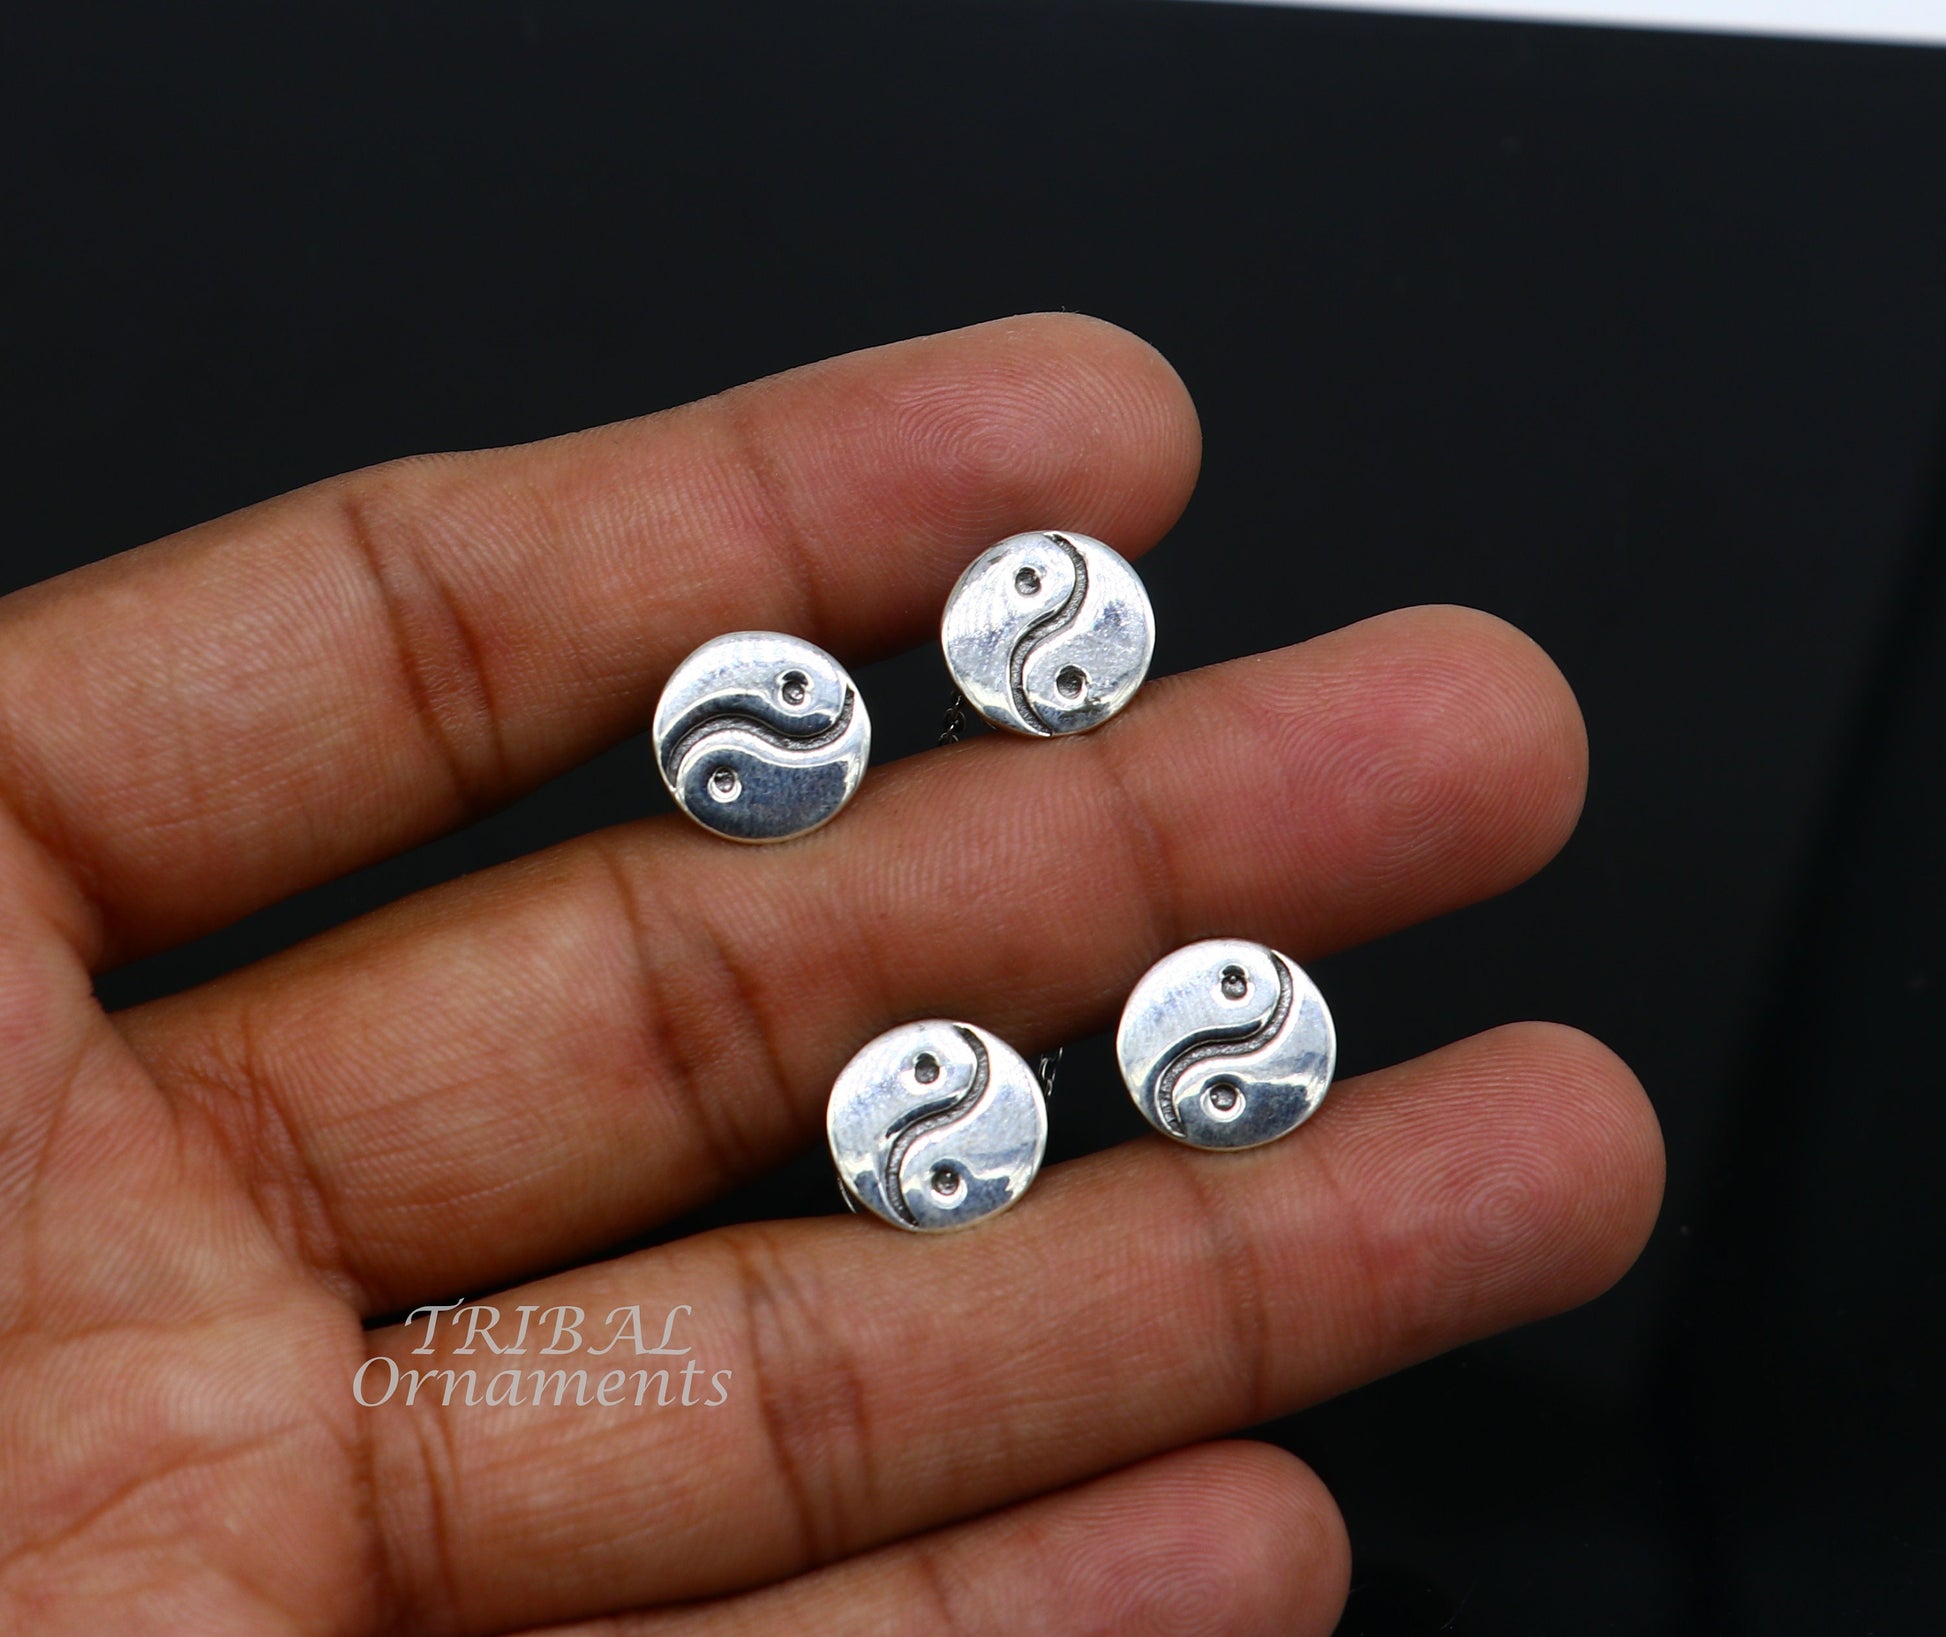 925 Sterling silver handmade amazing unique rond design shape ethnic style  design buttons for men's kurta, best gifting accessories btn20 - TRIBAL ORNAMENTS